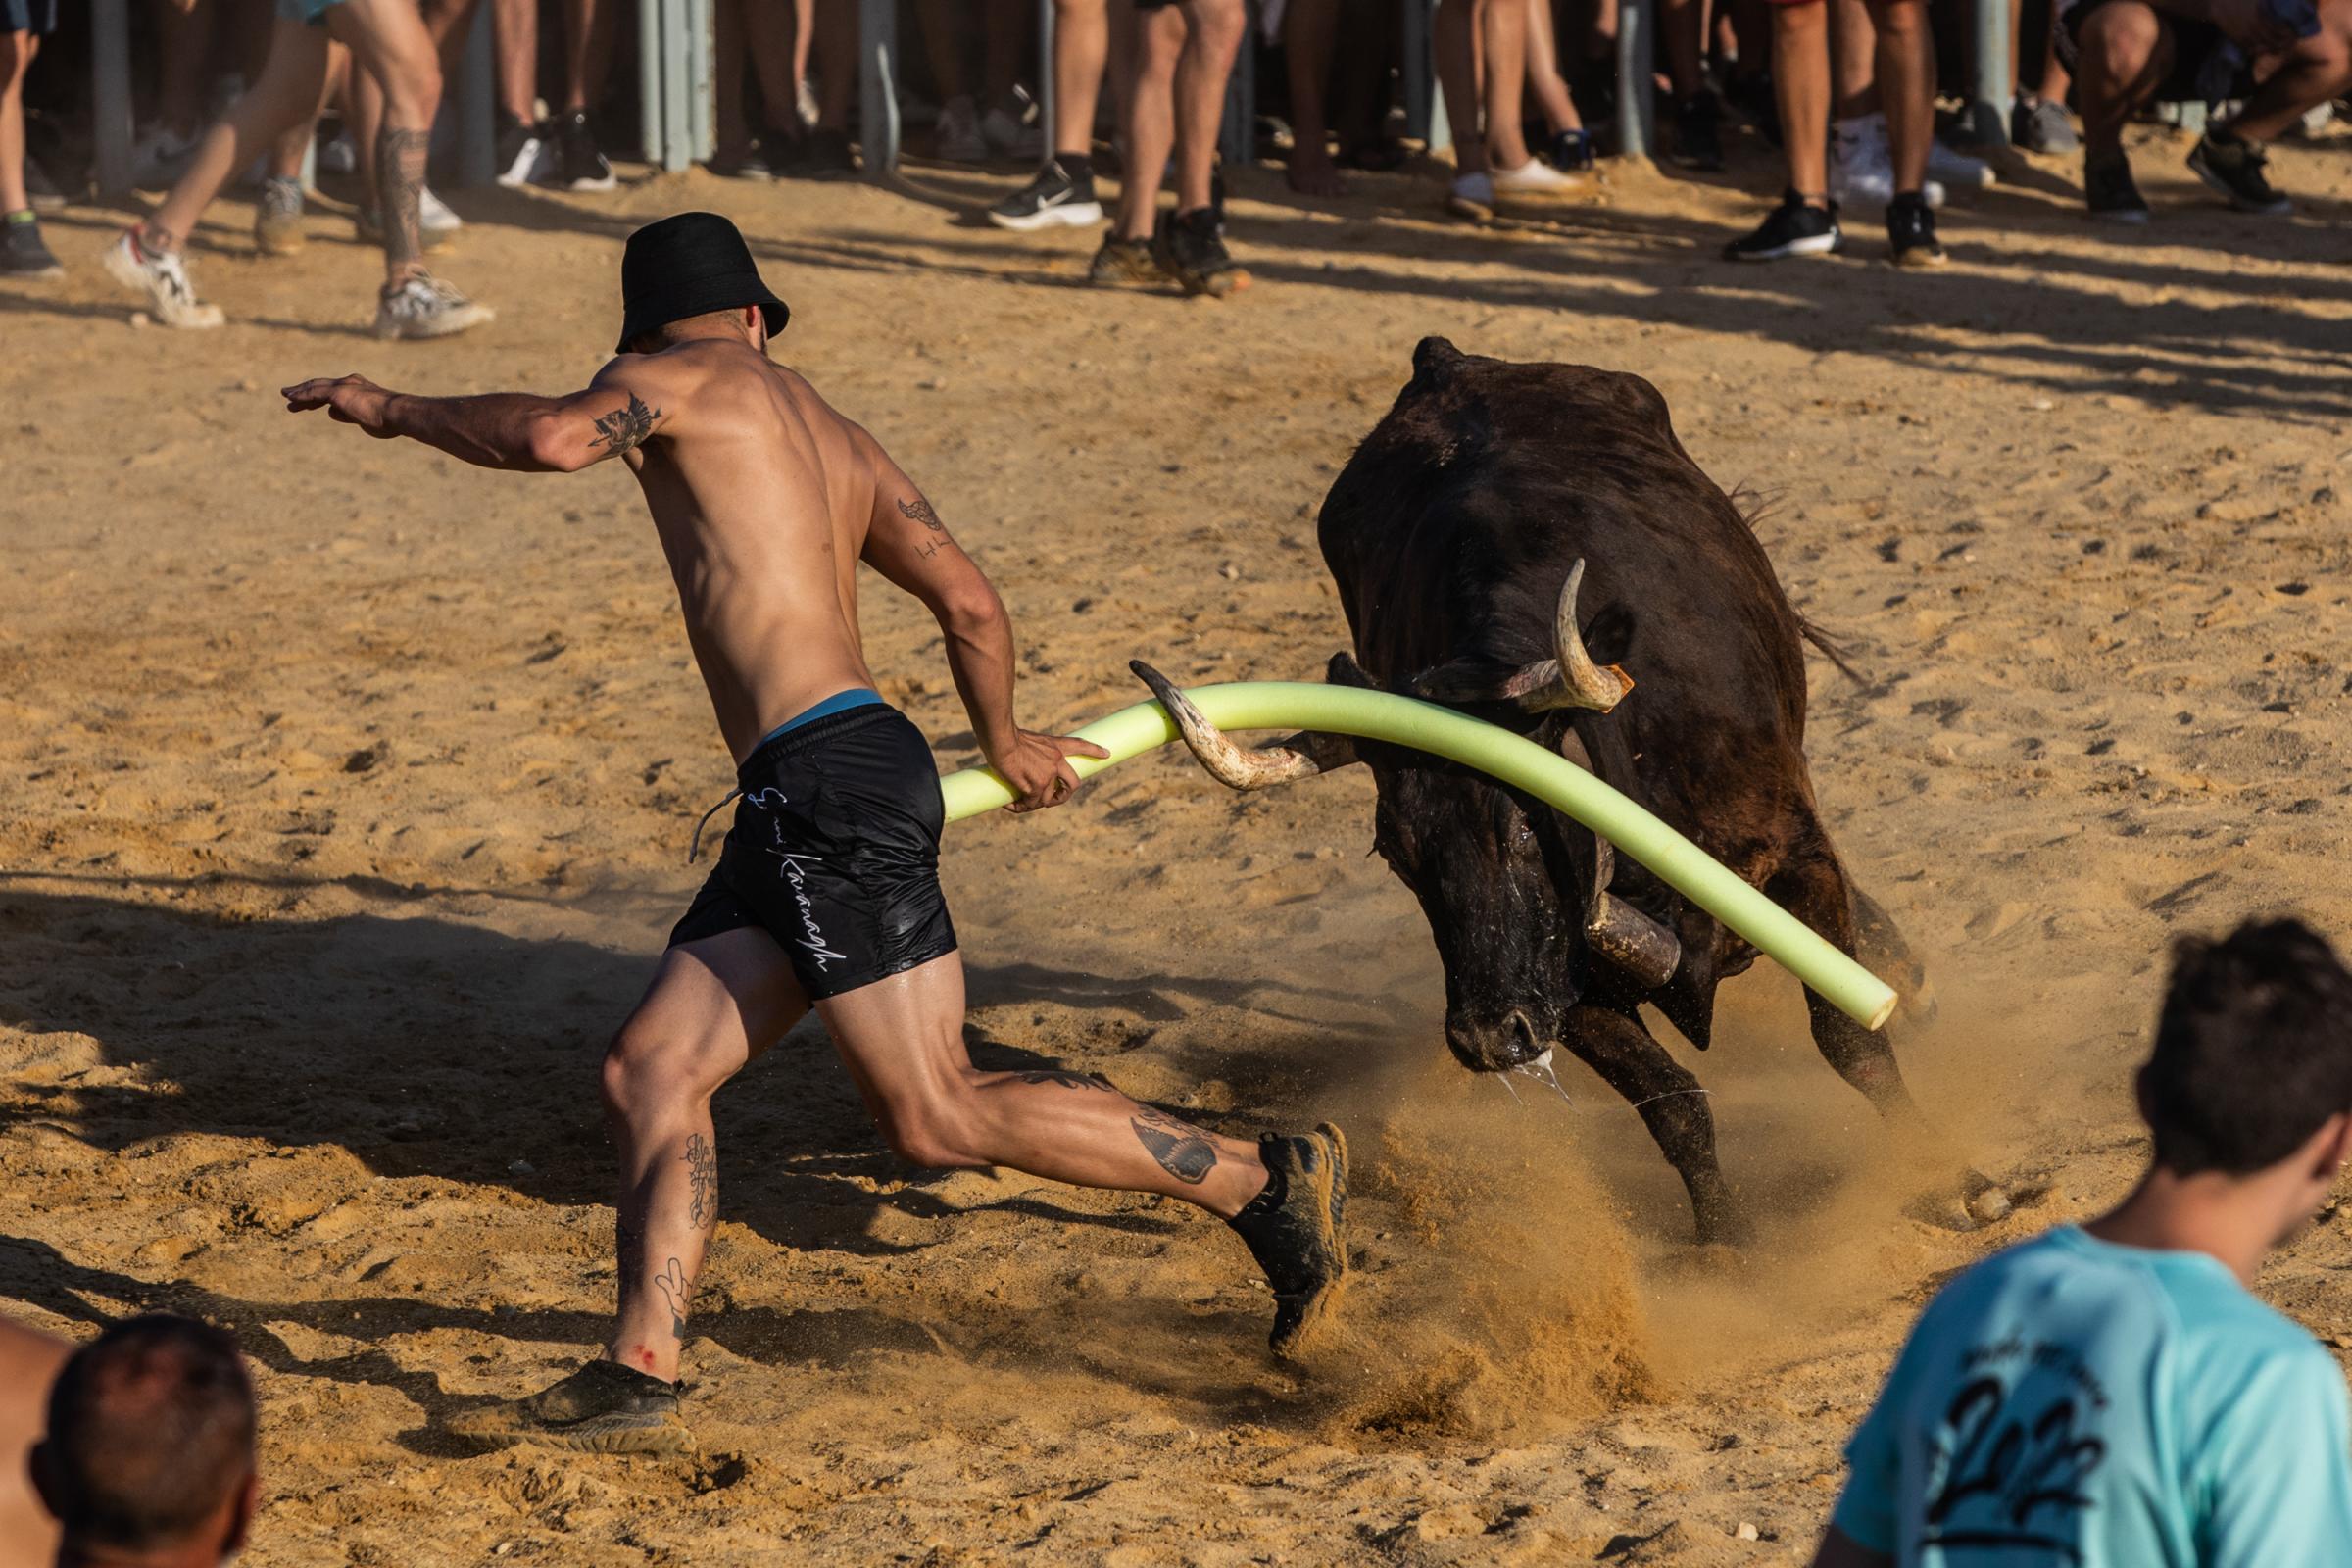 At 'Bous A La Mar', Revelers Take Plunge To Dodge Bulls And Beat The Heat - DENIA, SPAIN - JULY 17: A participant plays with the bull...